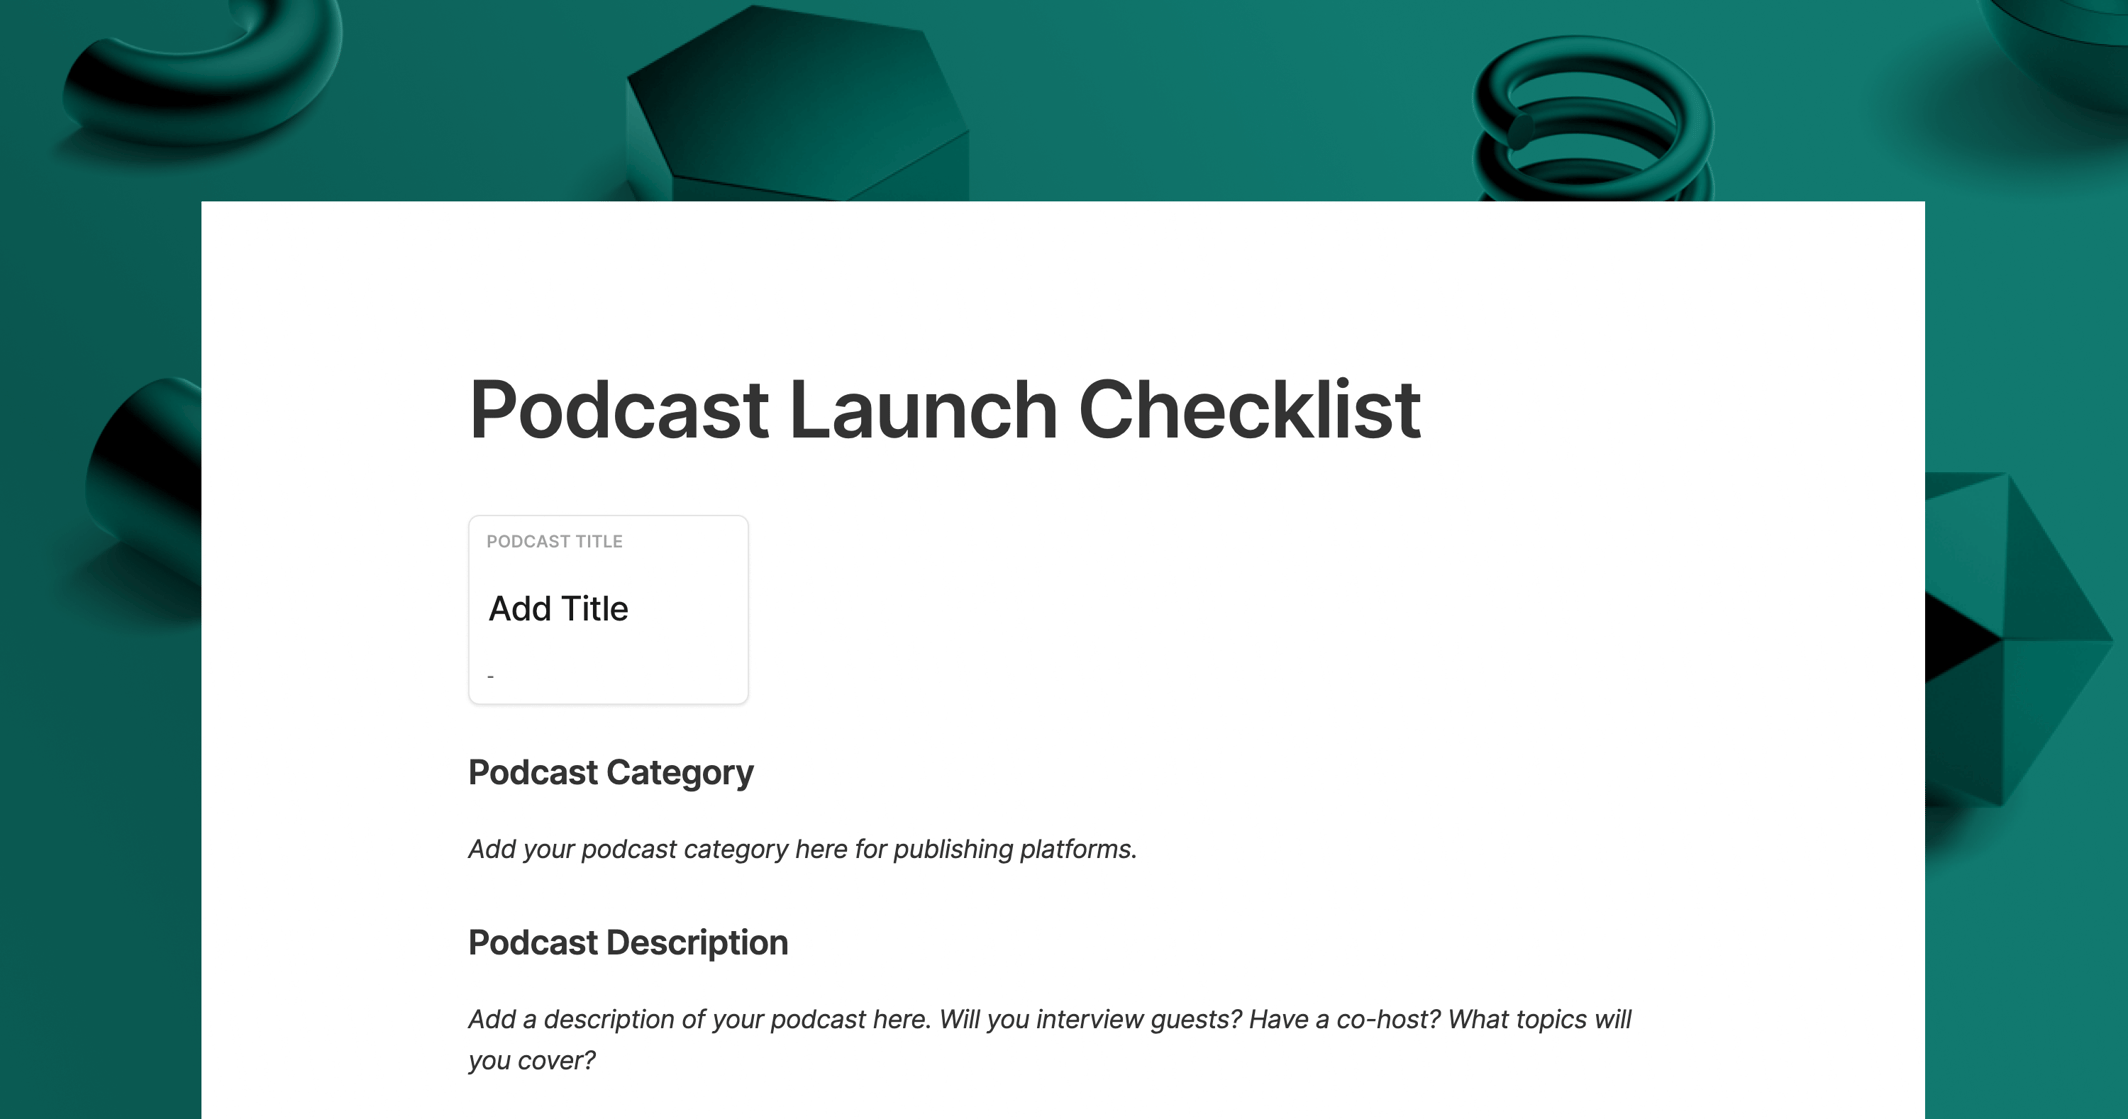 https://3389140.fs1.hubspotusercontent-na1.net/hubfs/3389140/podcast%20launch%20checklist%20cover.png